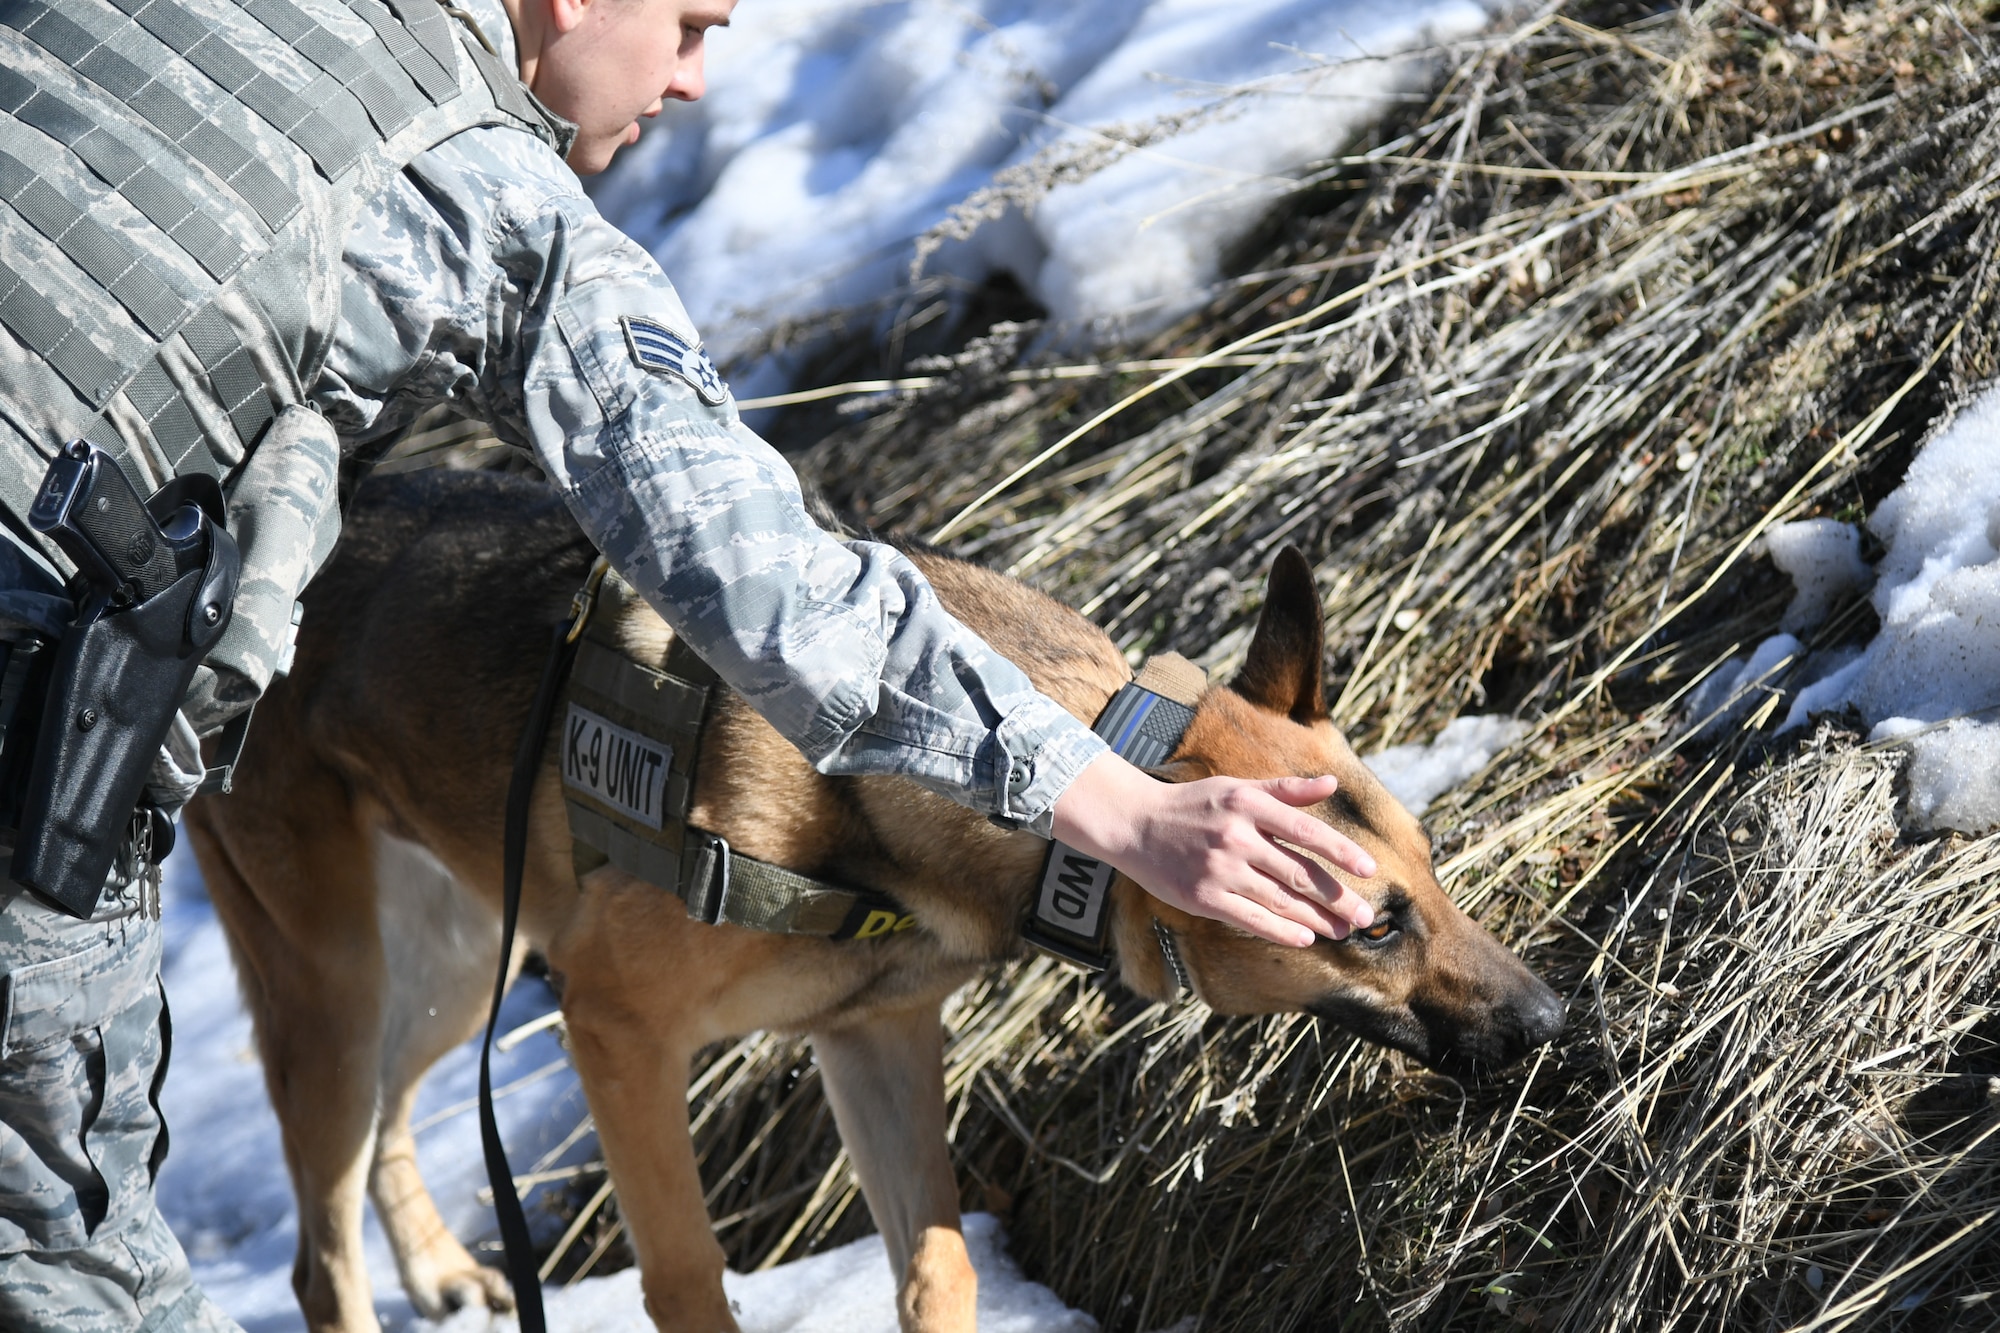 Senior Airman Michelle Winters, 75th Security Force Squadron, guides Joe, a military working dog, to sniff around a training course at Hill Air Force Base, Utah, March 4, 2020. Winters has been Joe’s handler for about four months and she said their bond is starting to form. Joe is a single-purpose MWD, trained as an explosive detection dog. (U.S. Air Force photo by Cynthia Griggs)